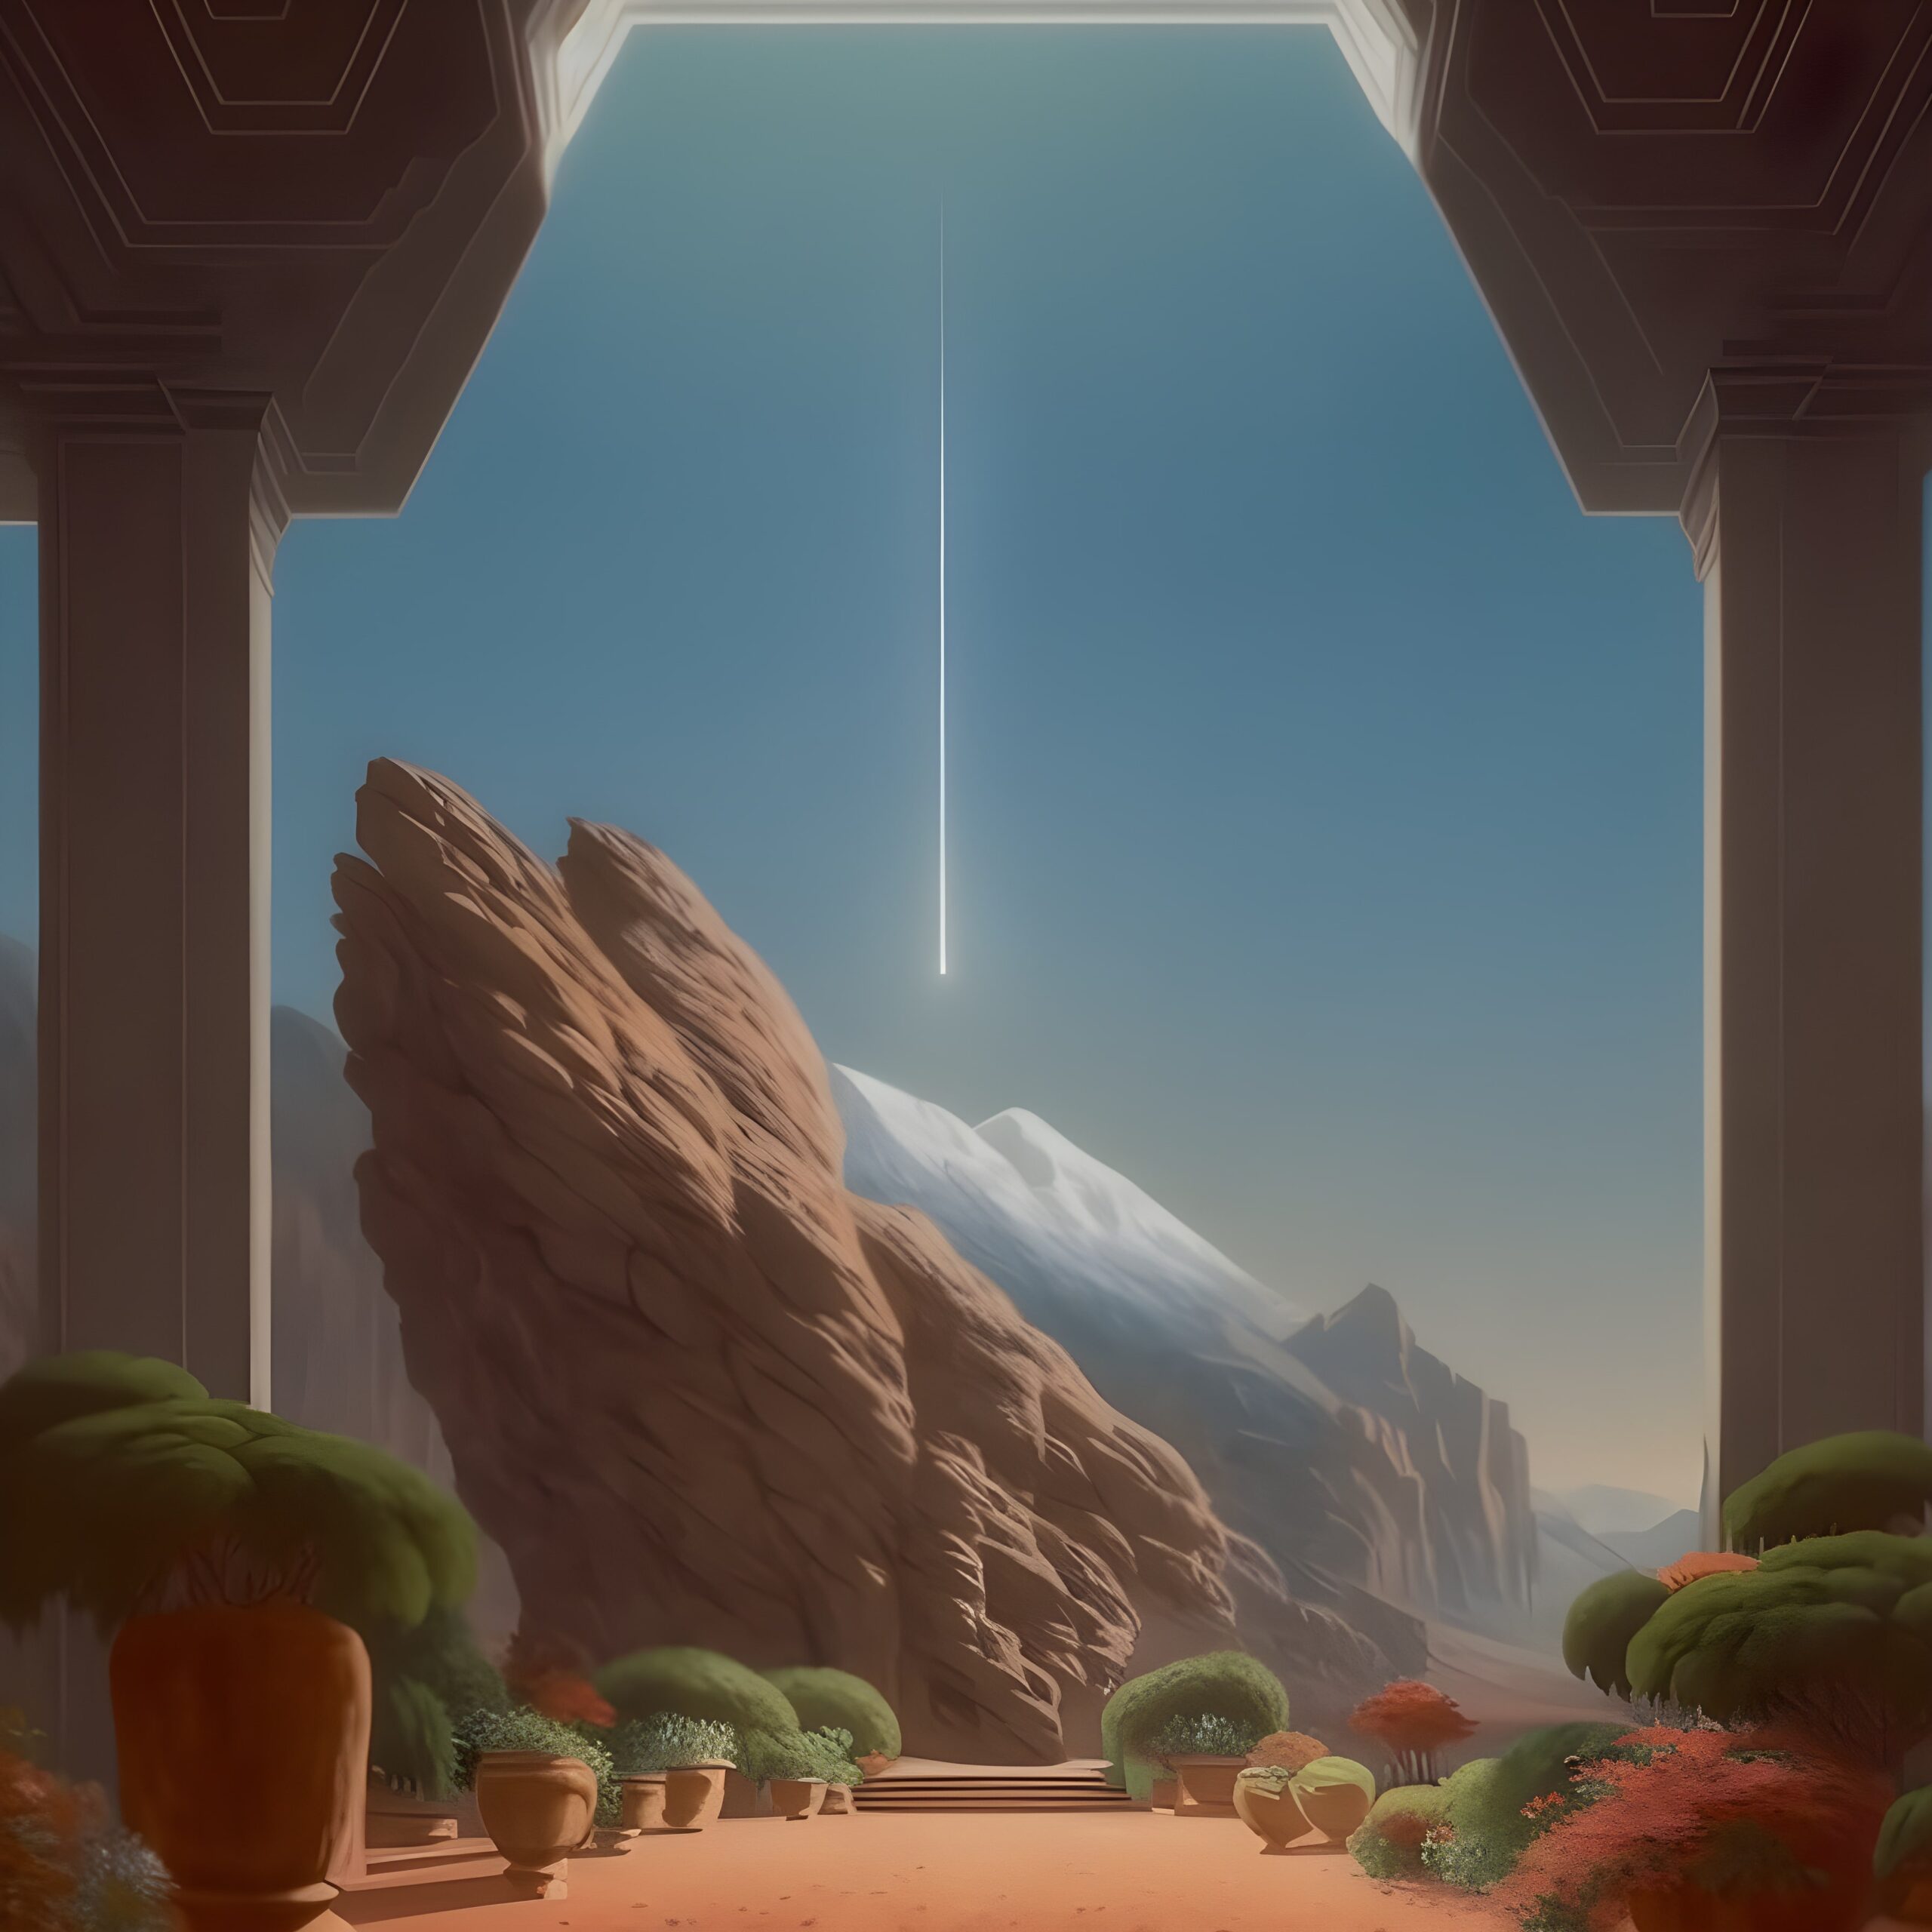 A digital image of a strange landscape, framed by an arch, with a shooting star at the center